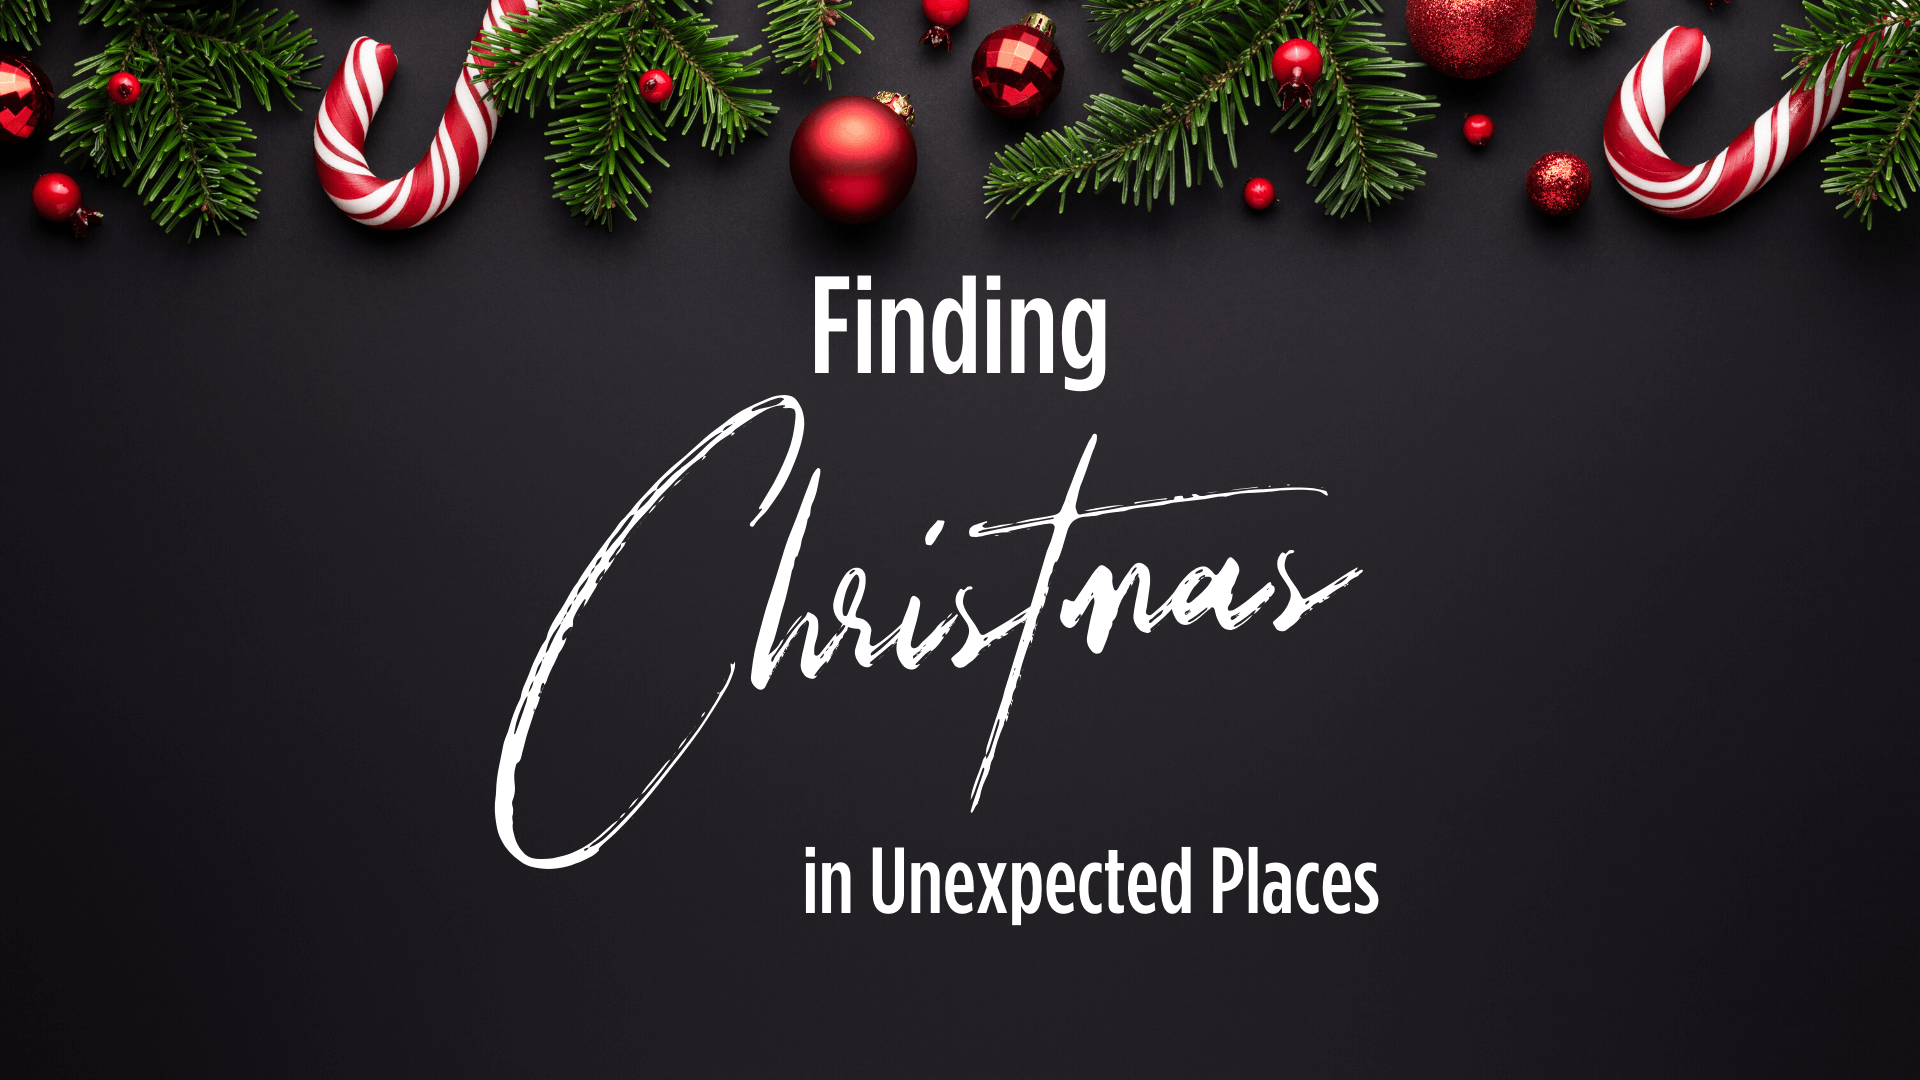 Finding Christmas in Unexpected Places